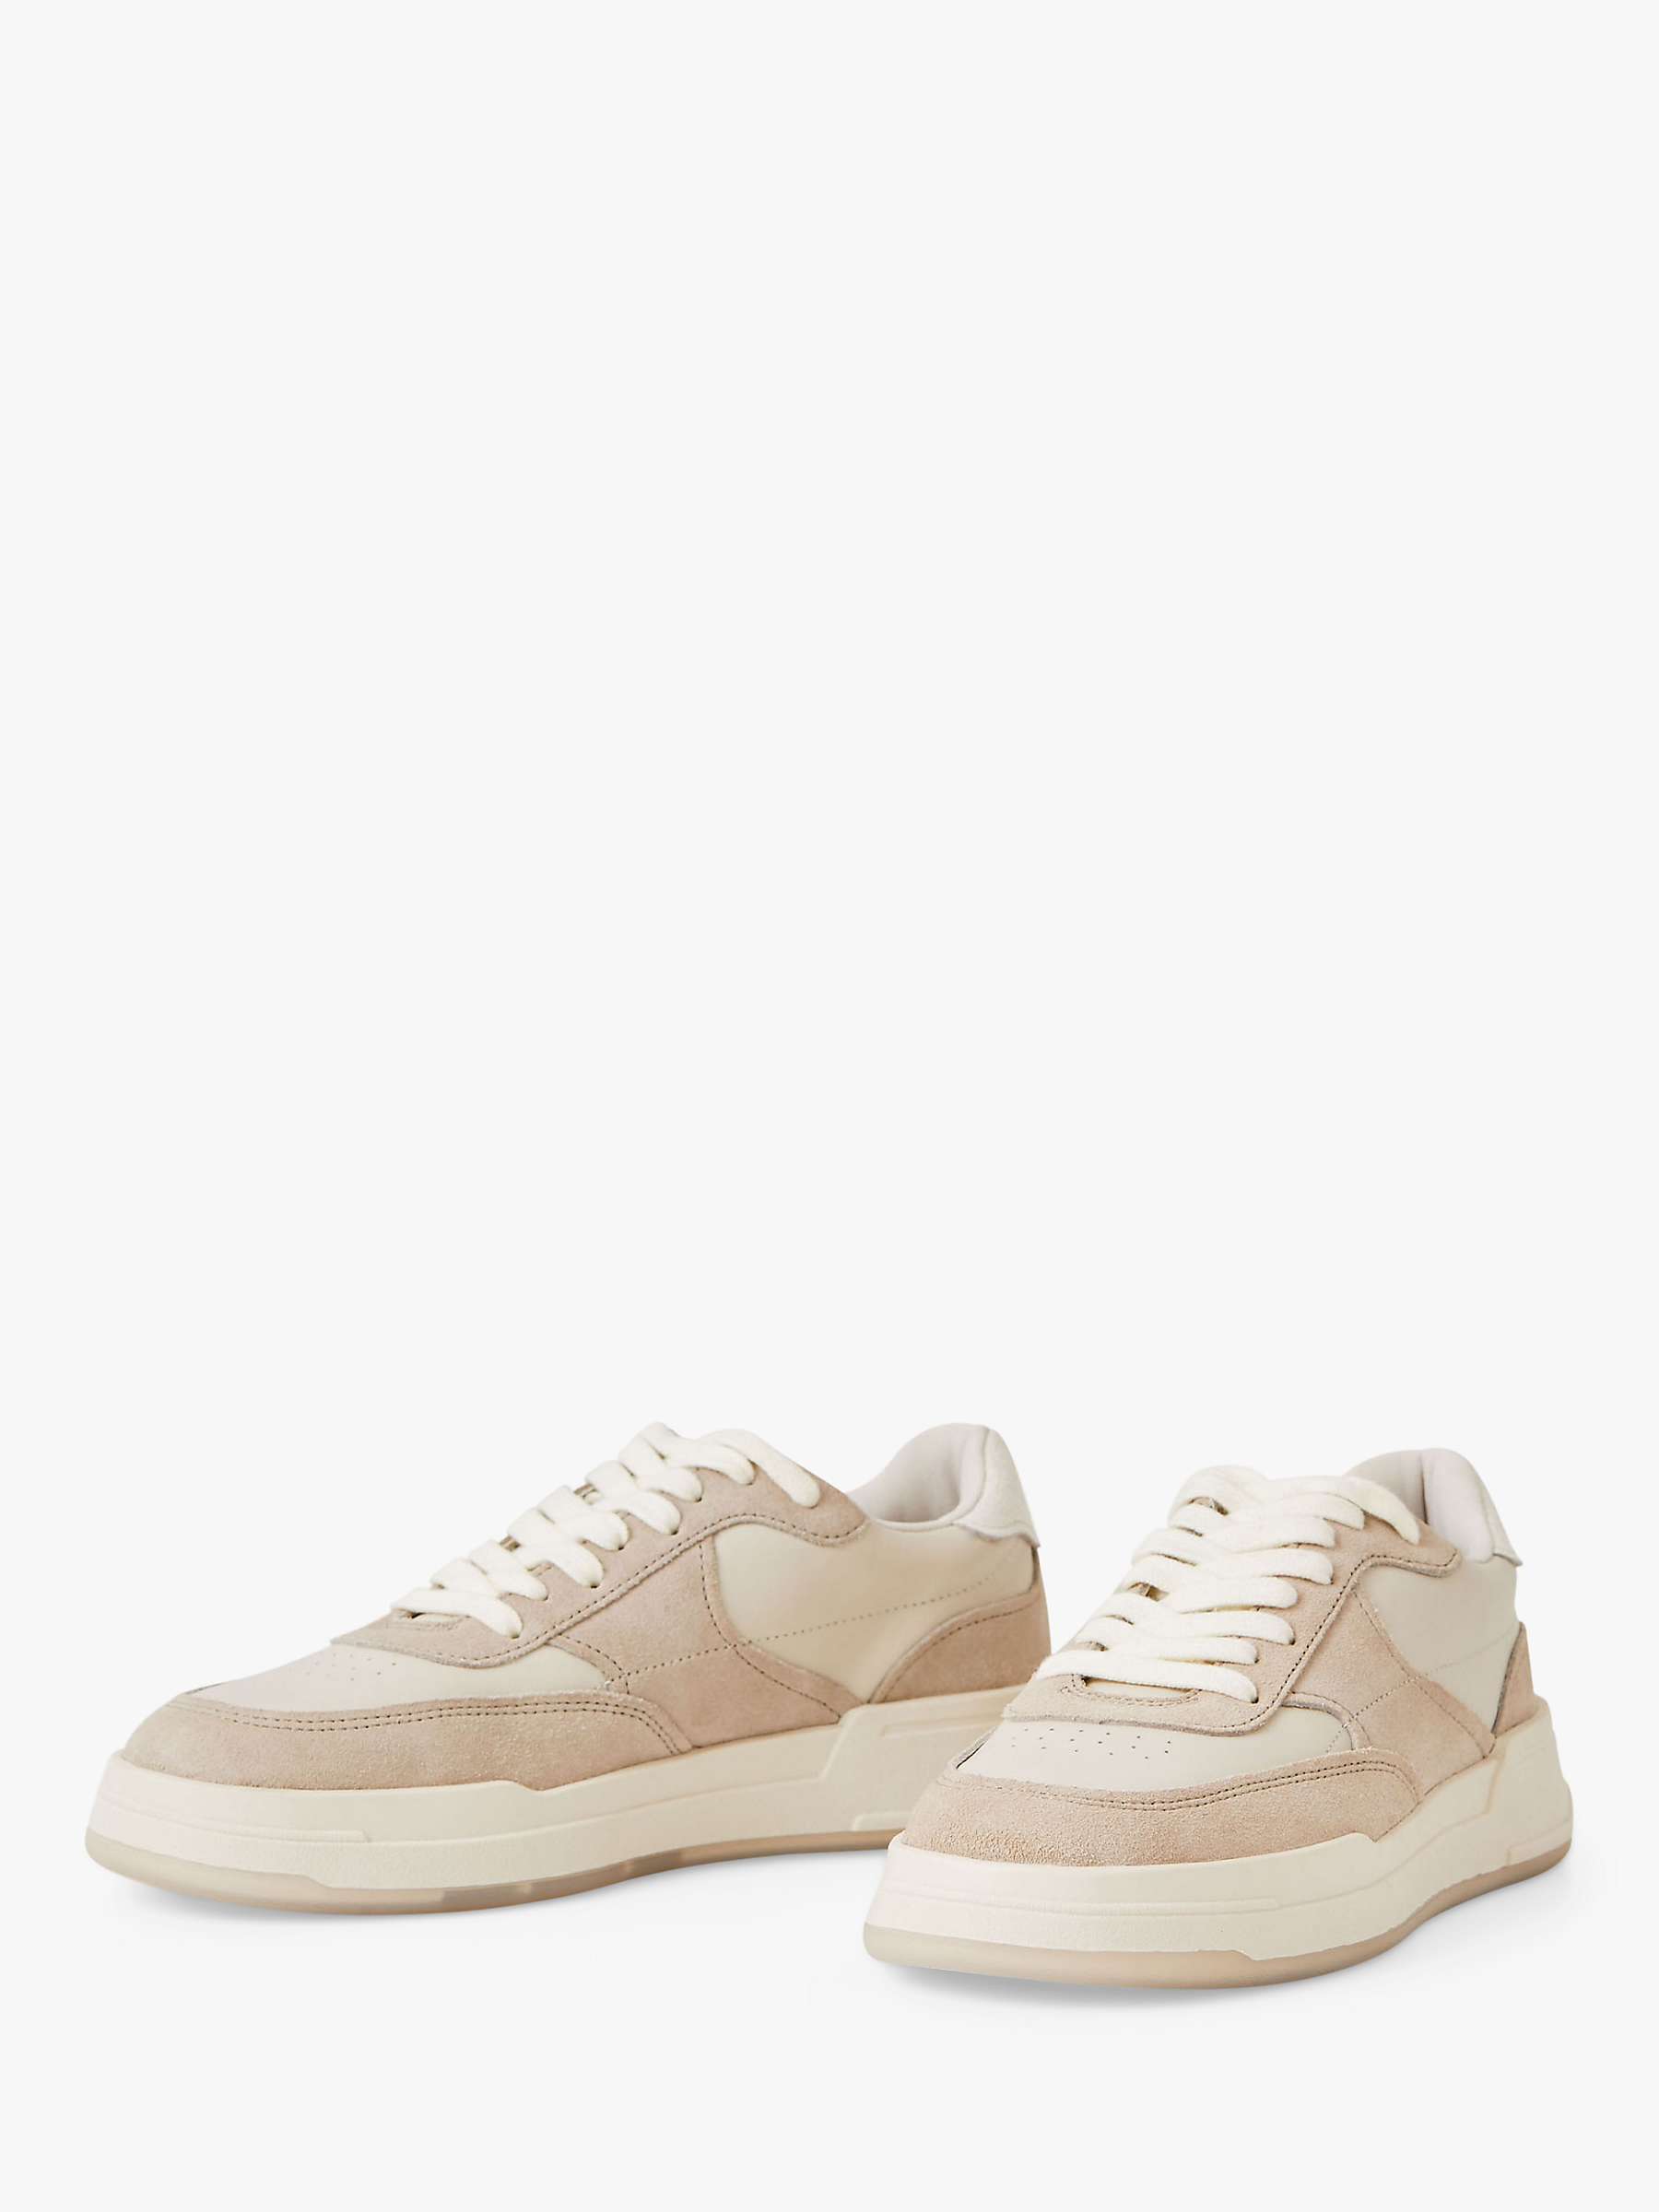 Buy Vagabond Shoemakers Selena Leather & Suede Trainers, Off White/Cream Online at johnlewis.com